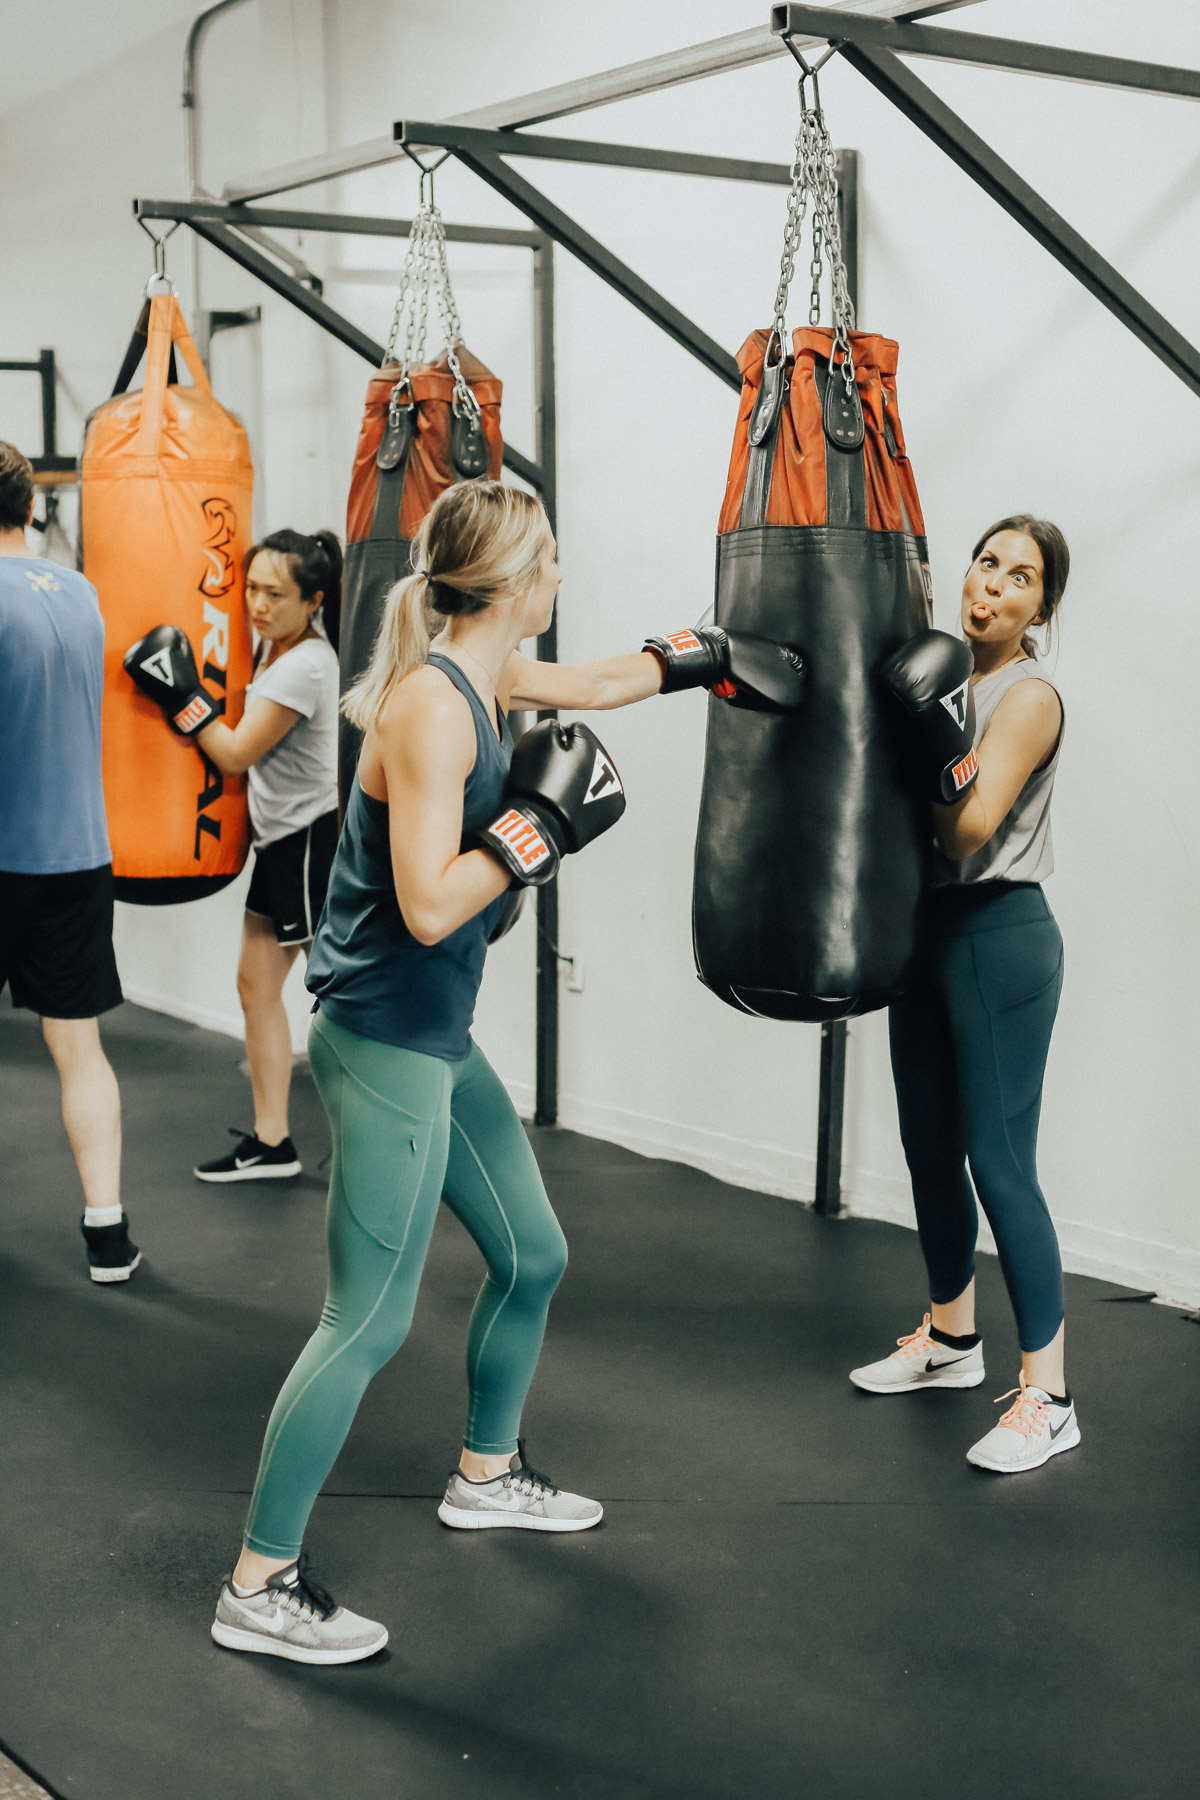 new workout class boxing in Athleta